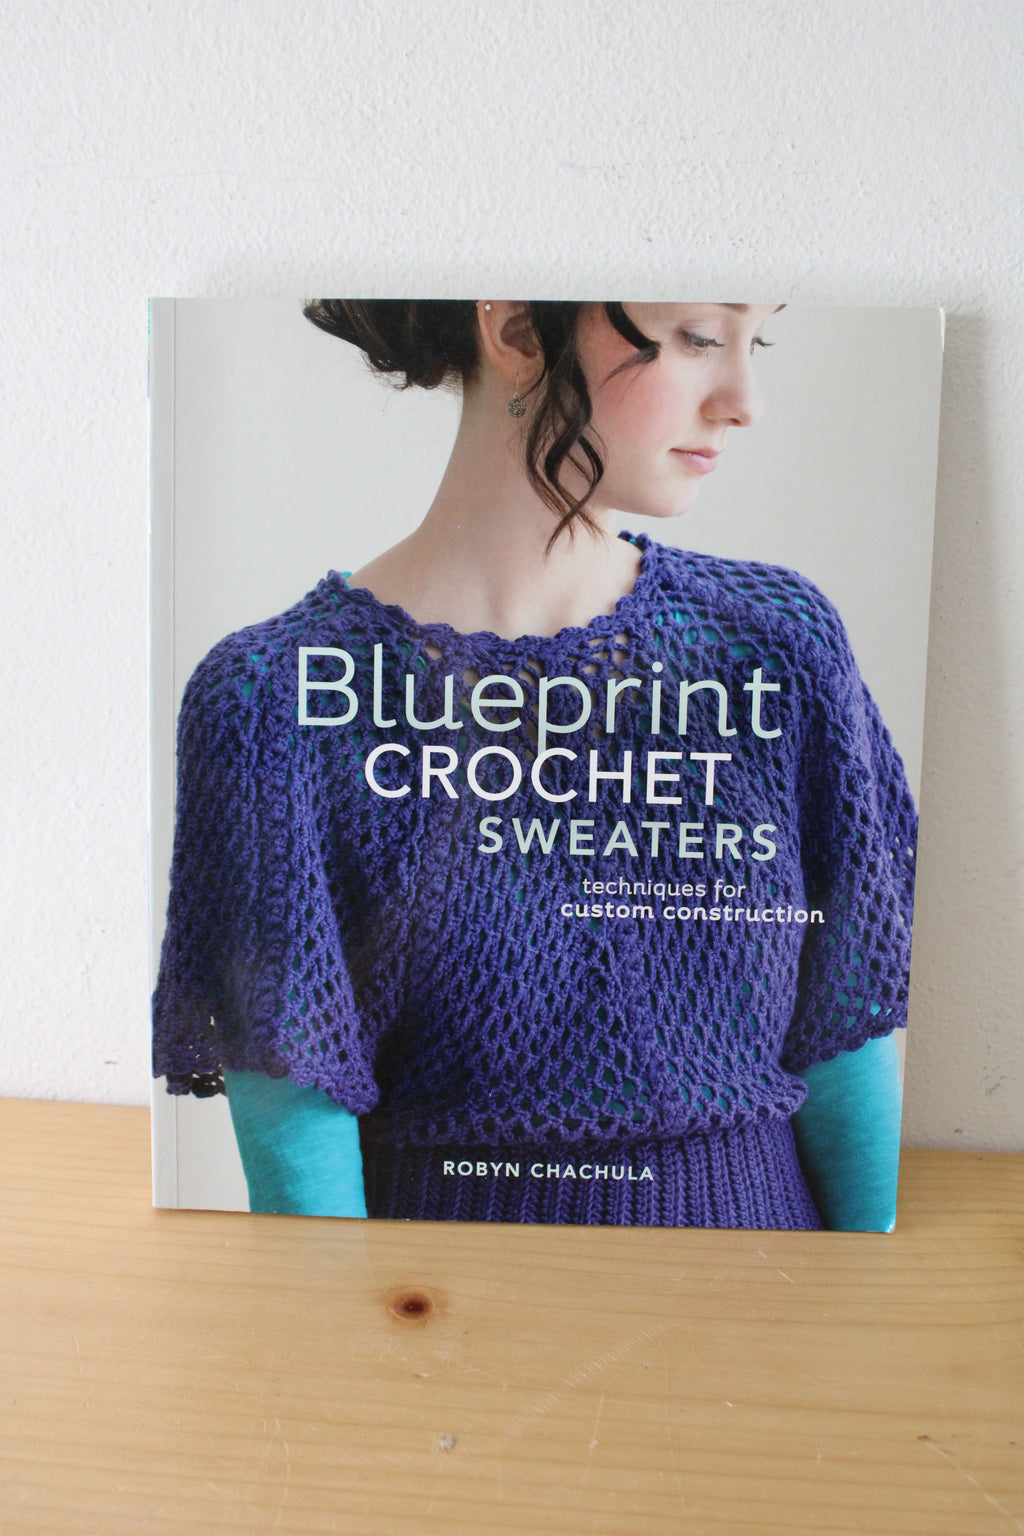 Blueprint Crochet Sweaters (Techniques For Custom Construction) By Robyn Chachula